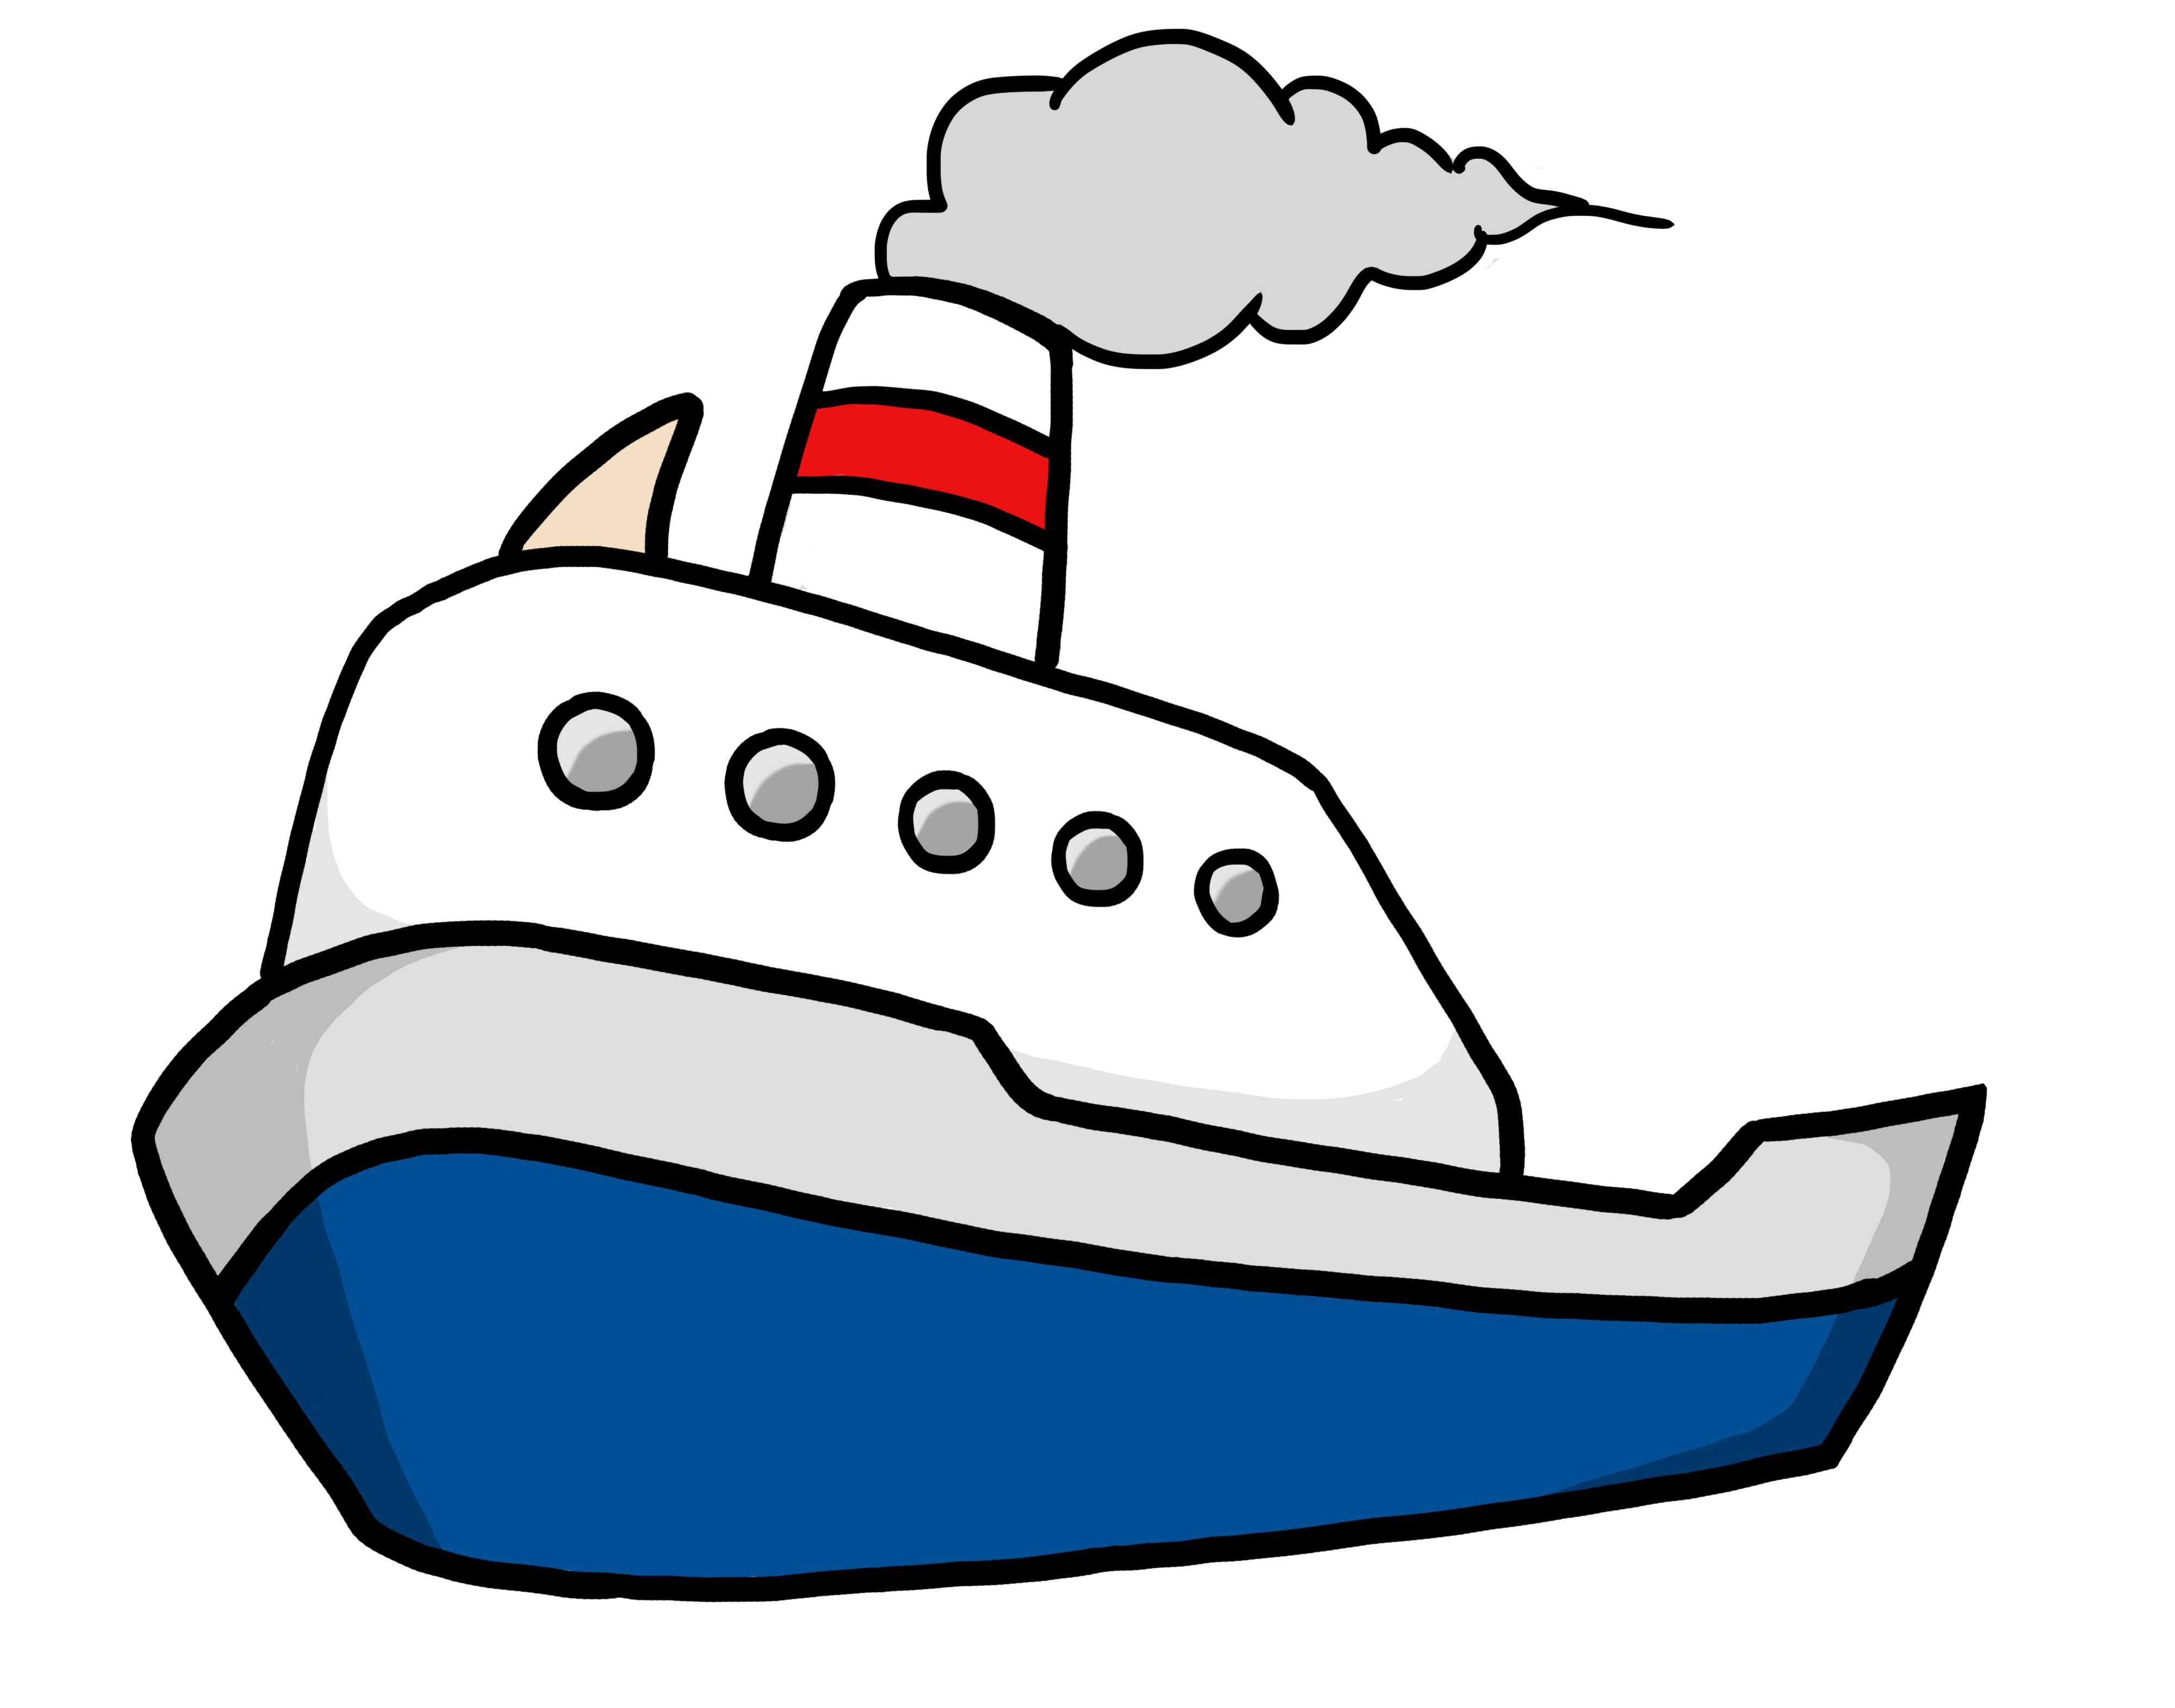 3451 Boat free clipart.